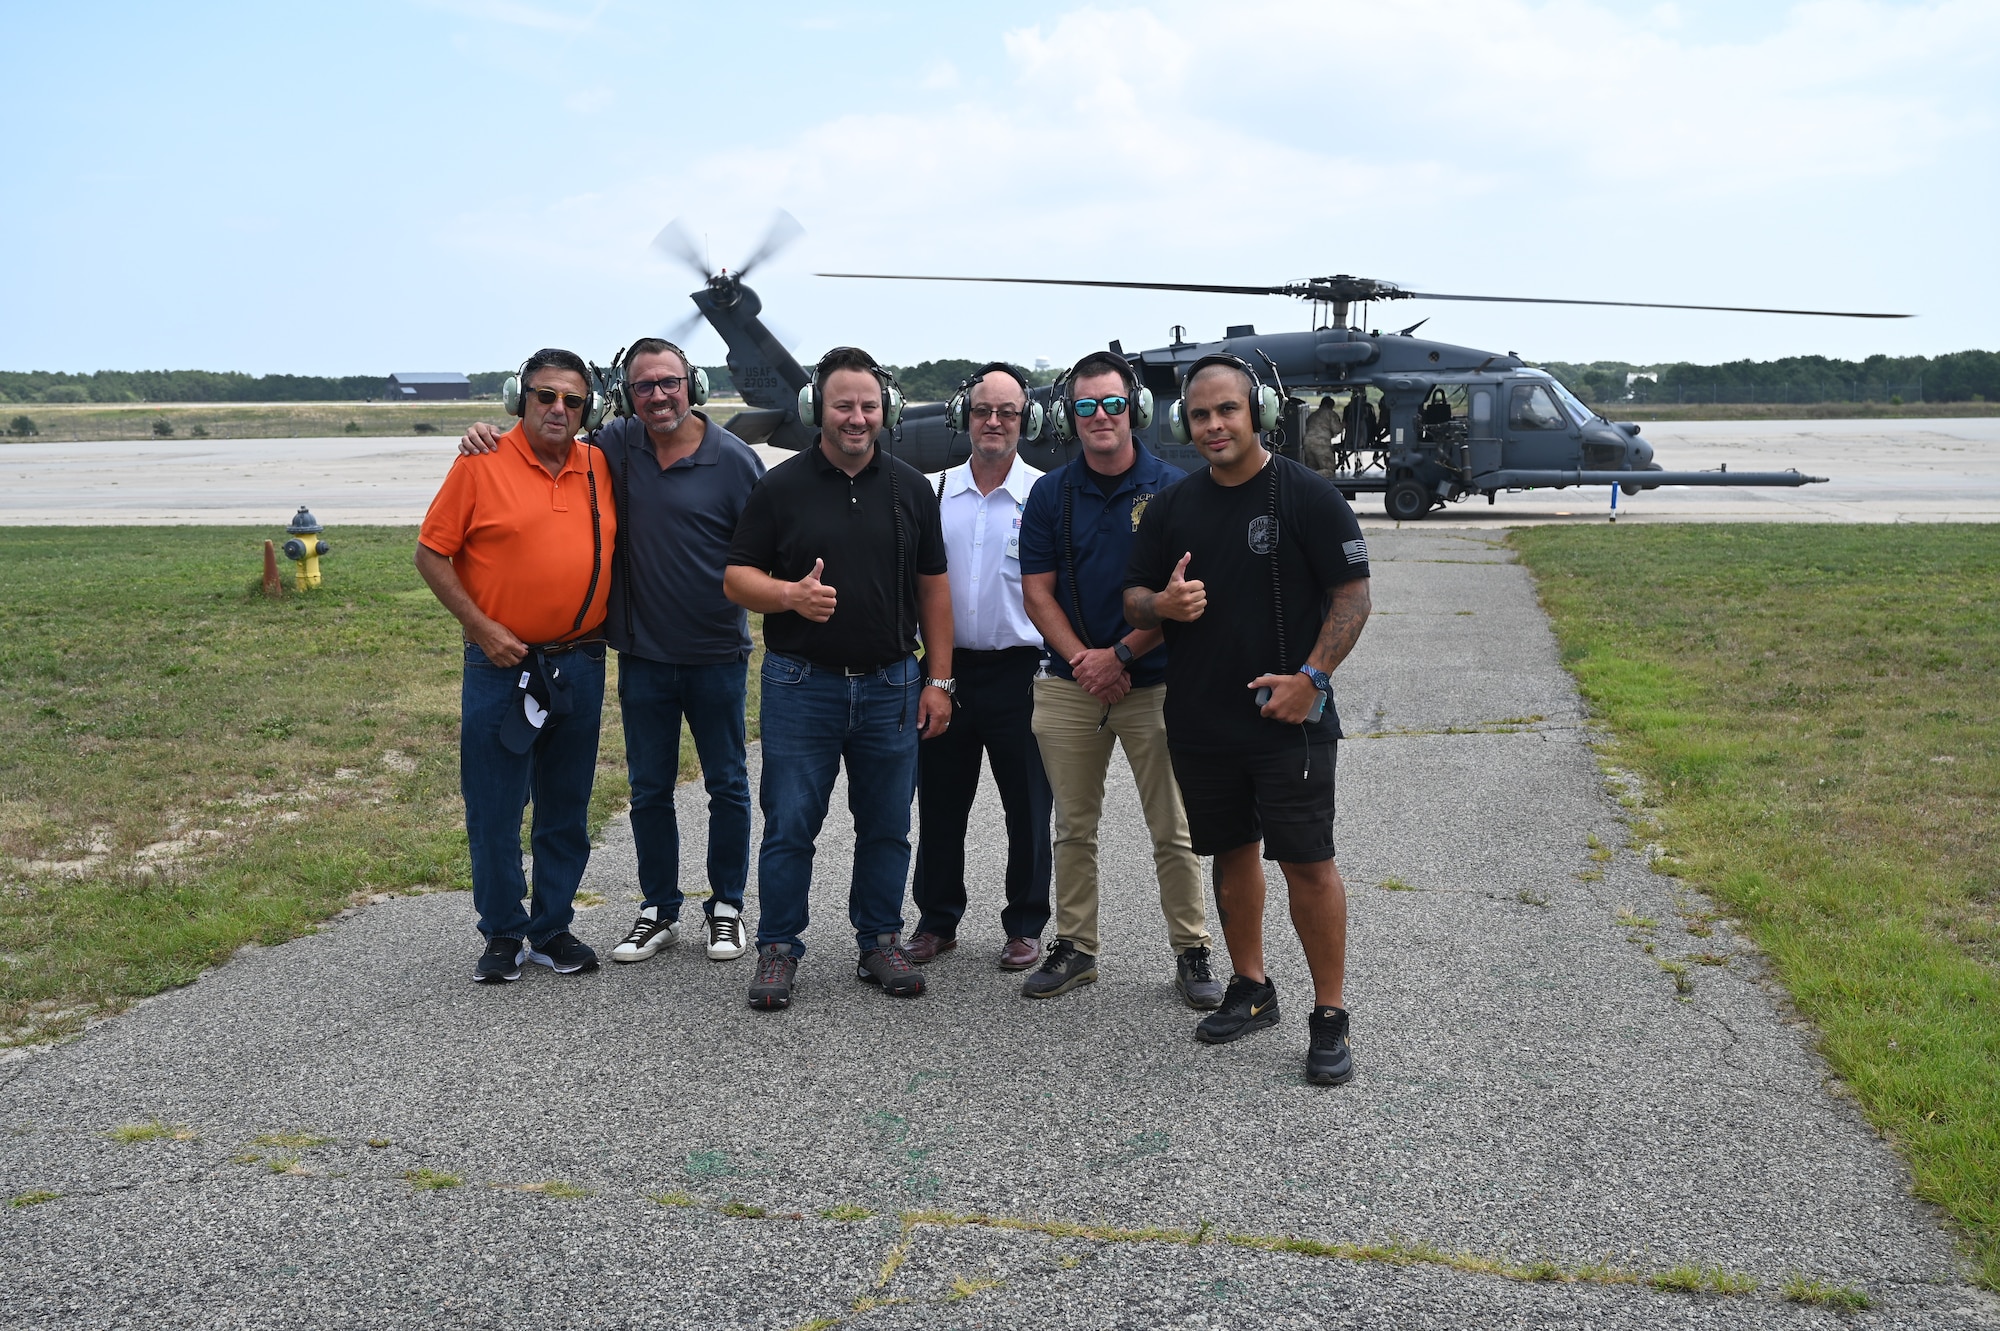 Civilian employers of members of the New York National Guard pose for a photo after a flight in an HH-60G Pave Hawk helicopter at the 106th Rescue Wing, Westhampton Beach, N.Y., Aug. 5, 2023. The 106th Rescue Wing welcomed Guardsmen’s civilian employers on base as part of “Bosslift,” an event sponsored by the Employee Support of the Guard and Reserve program.